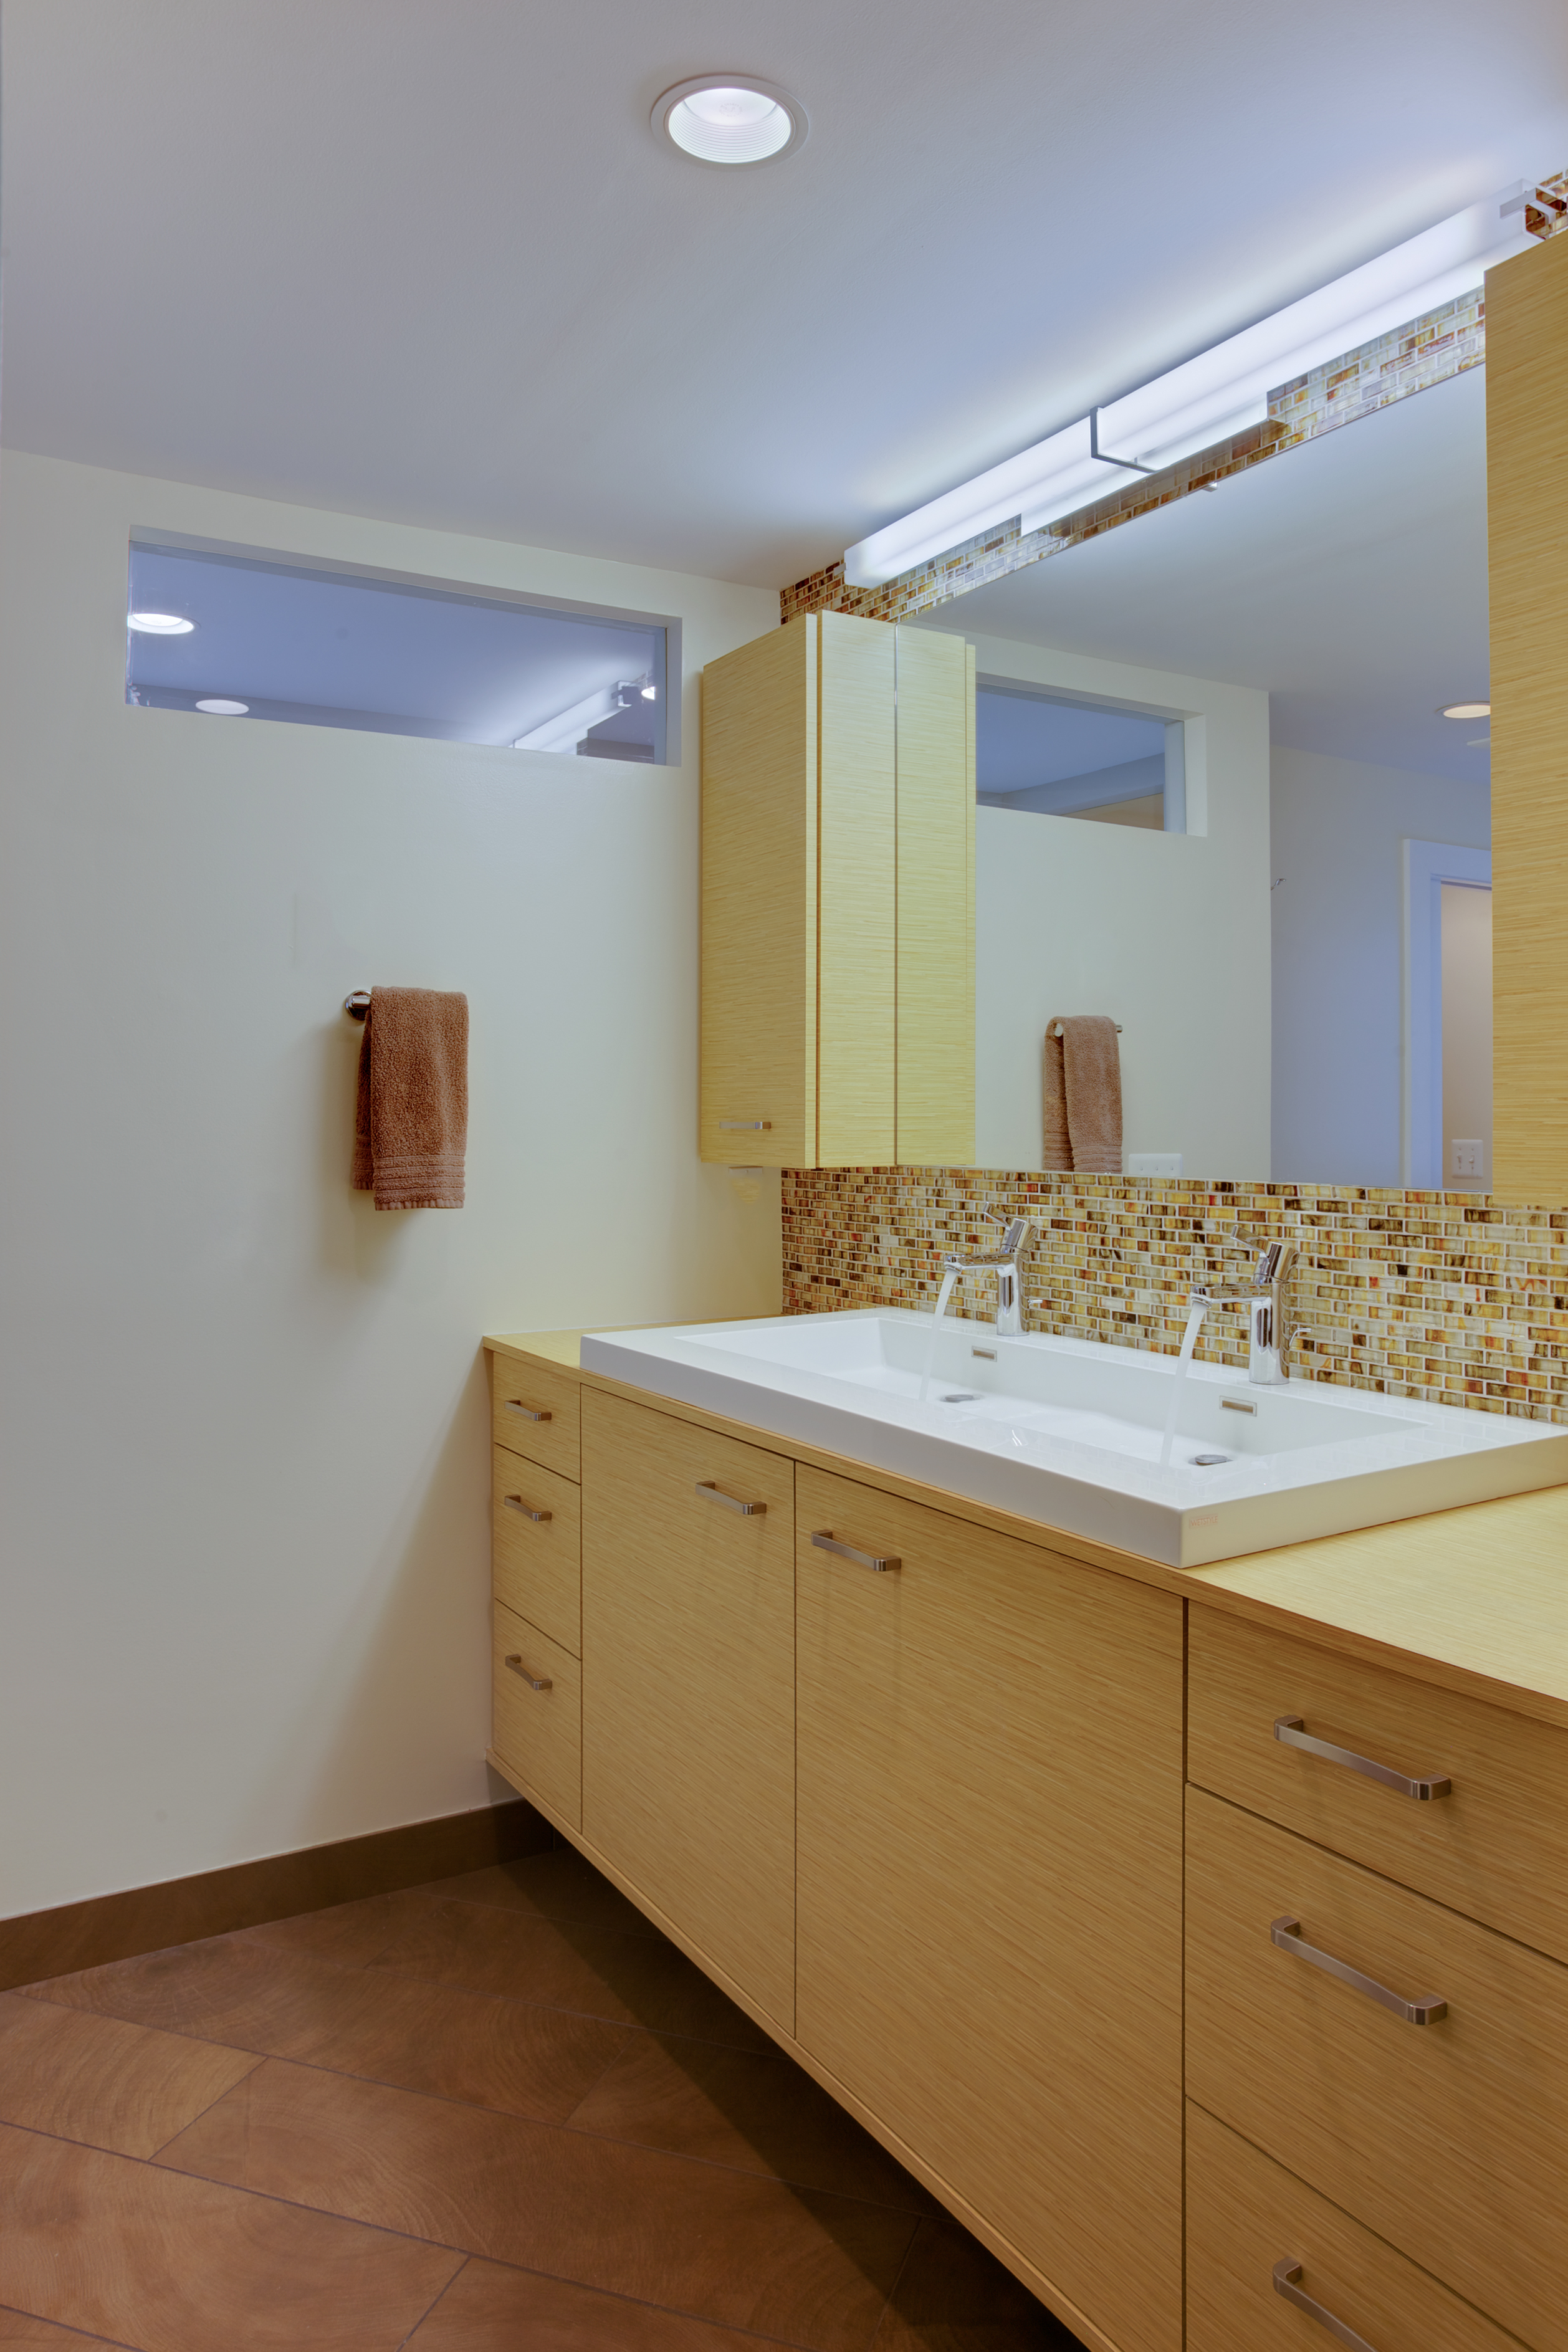 Bathroom with double vanity and yellow, wood cabinetry - view 2